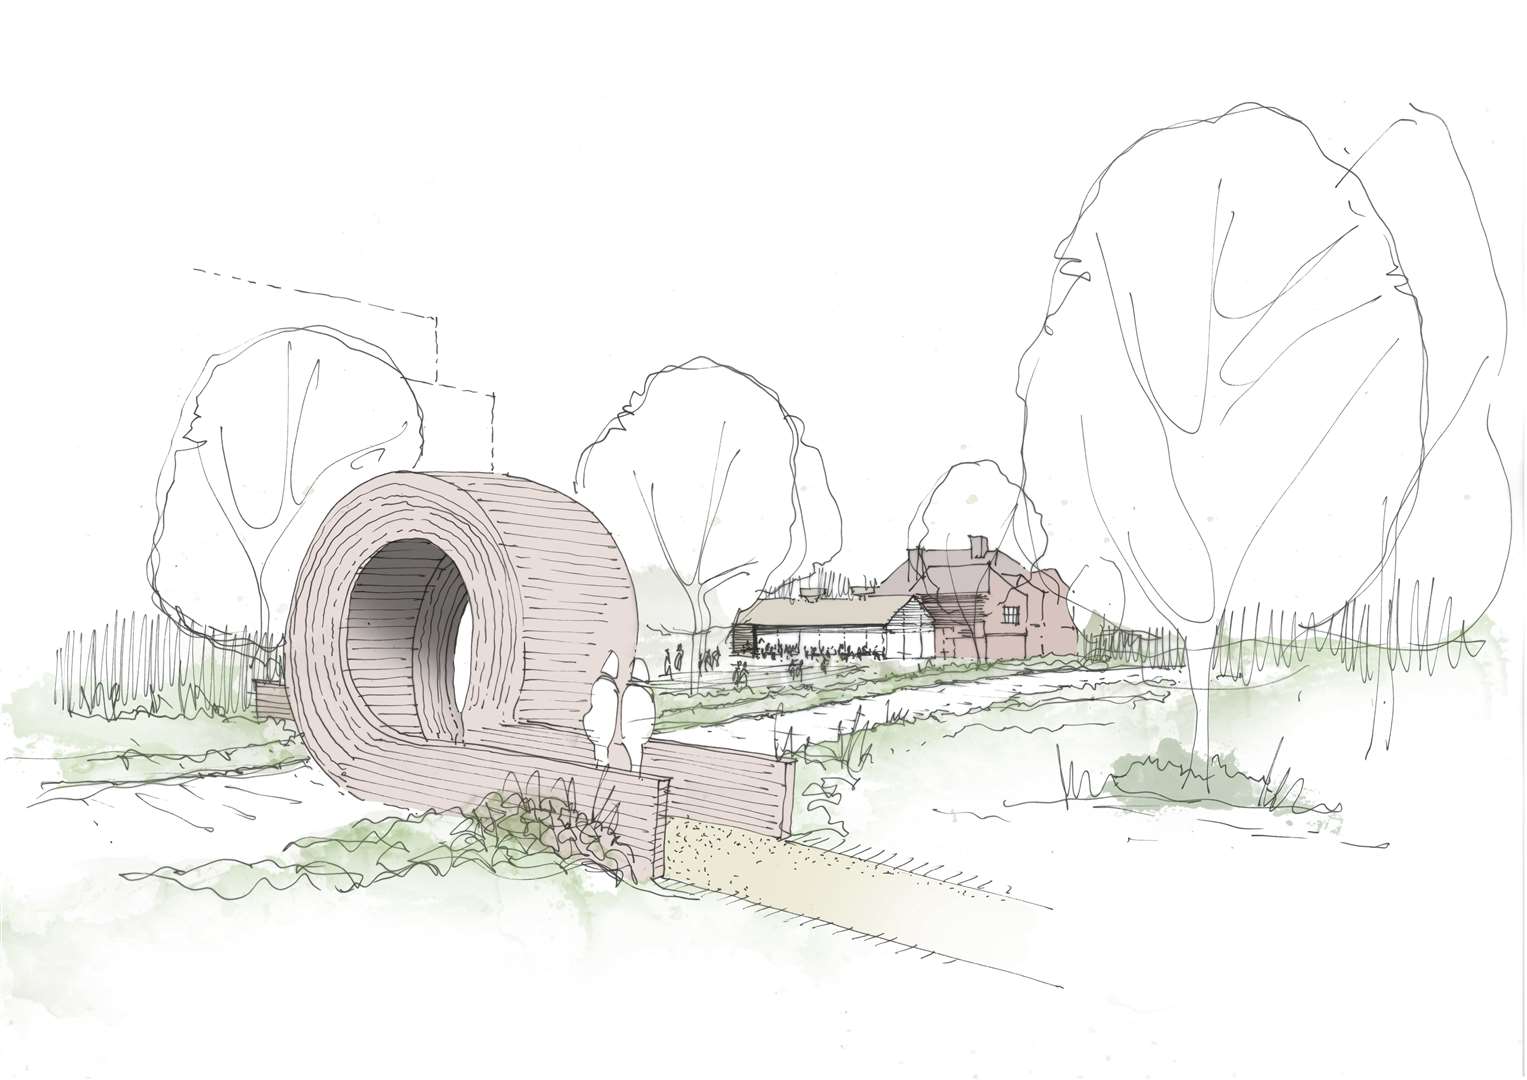 A loop-the-loop bridge by Alex Chinneck will be built near the listed building. (6967299)